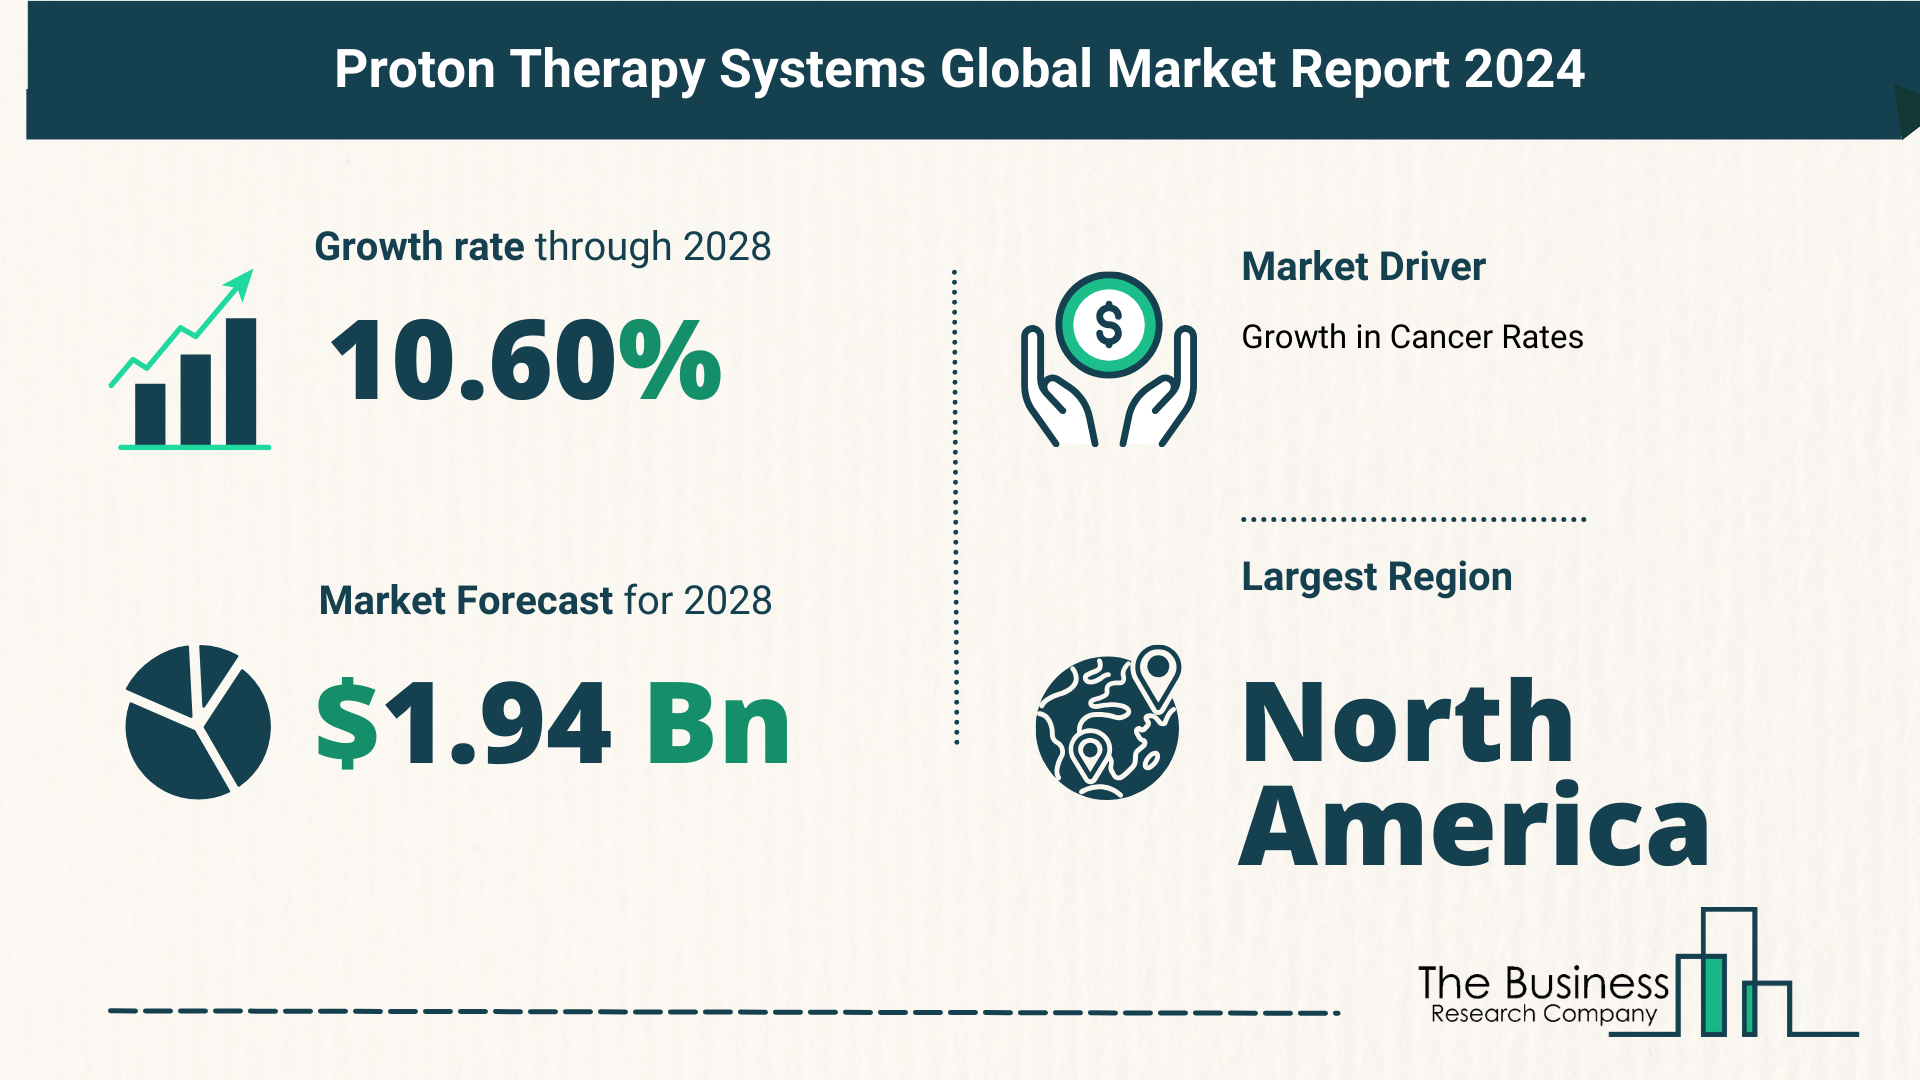 Global Proton Therapy Systems Market Analysis: Estimated Market Size And Growth Rate